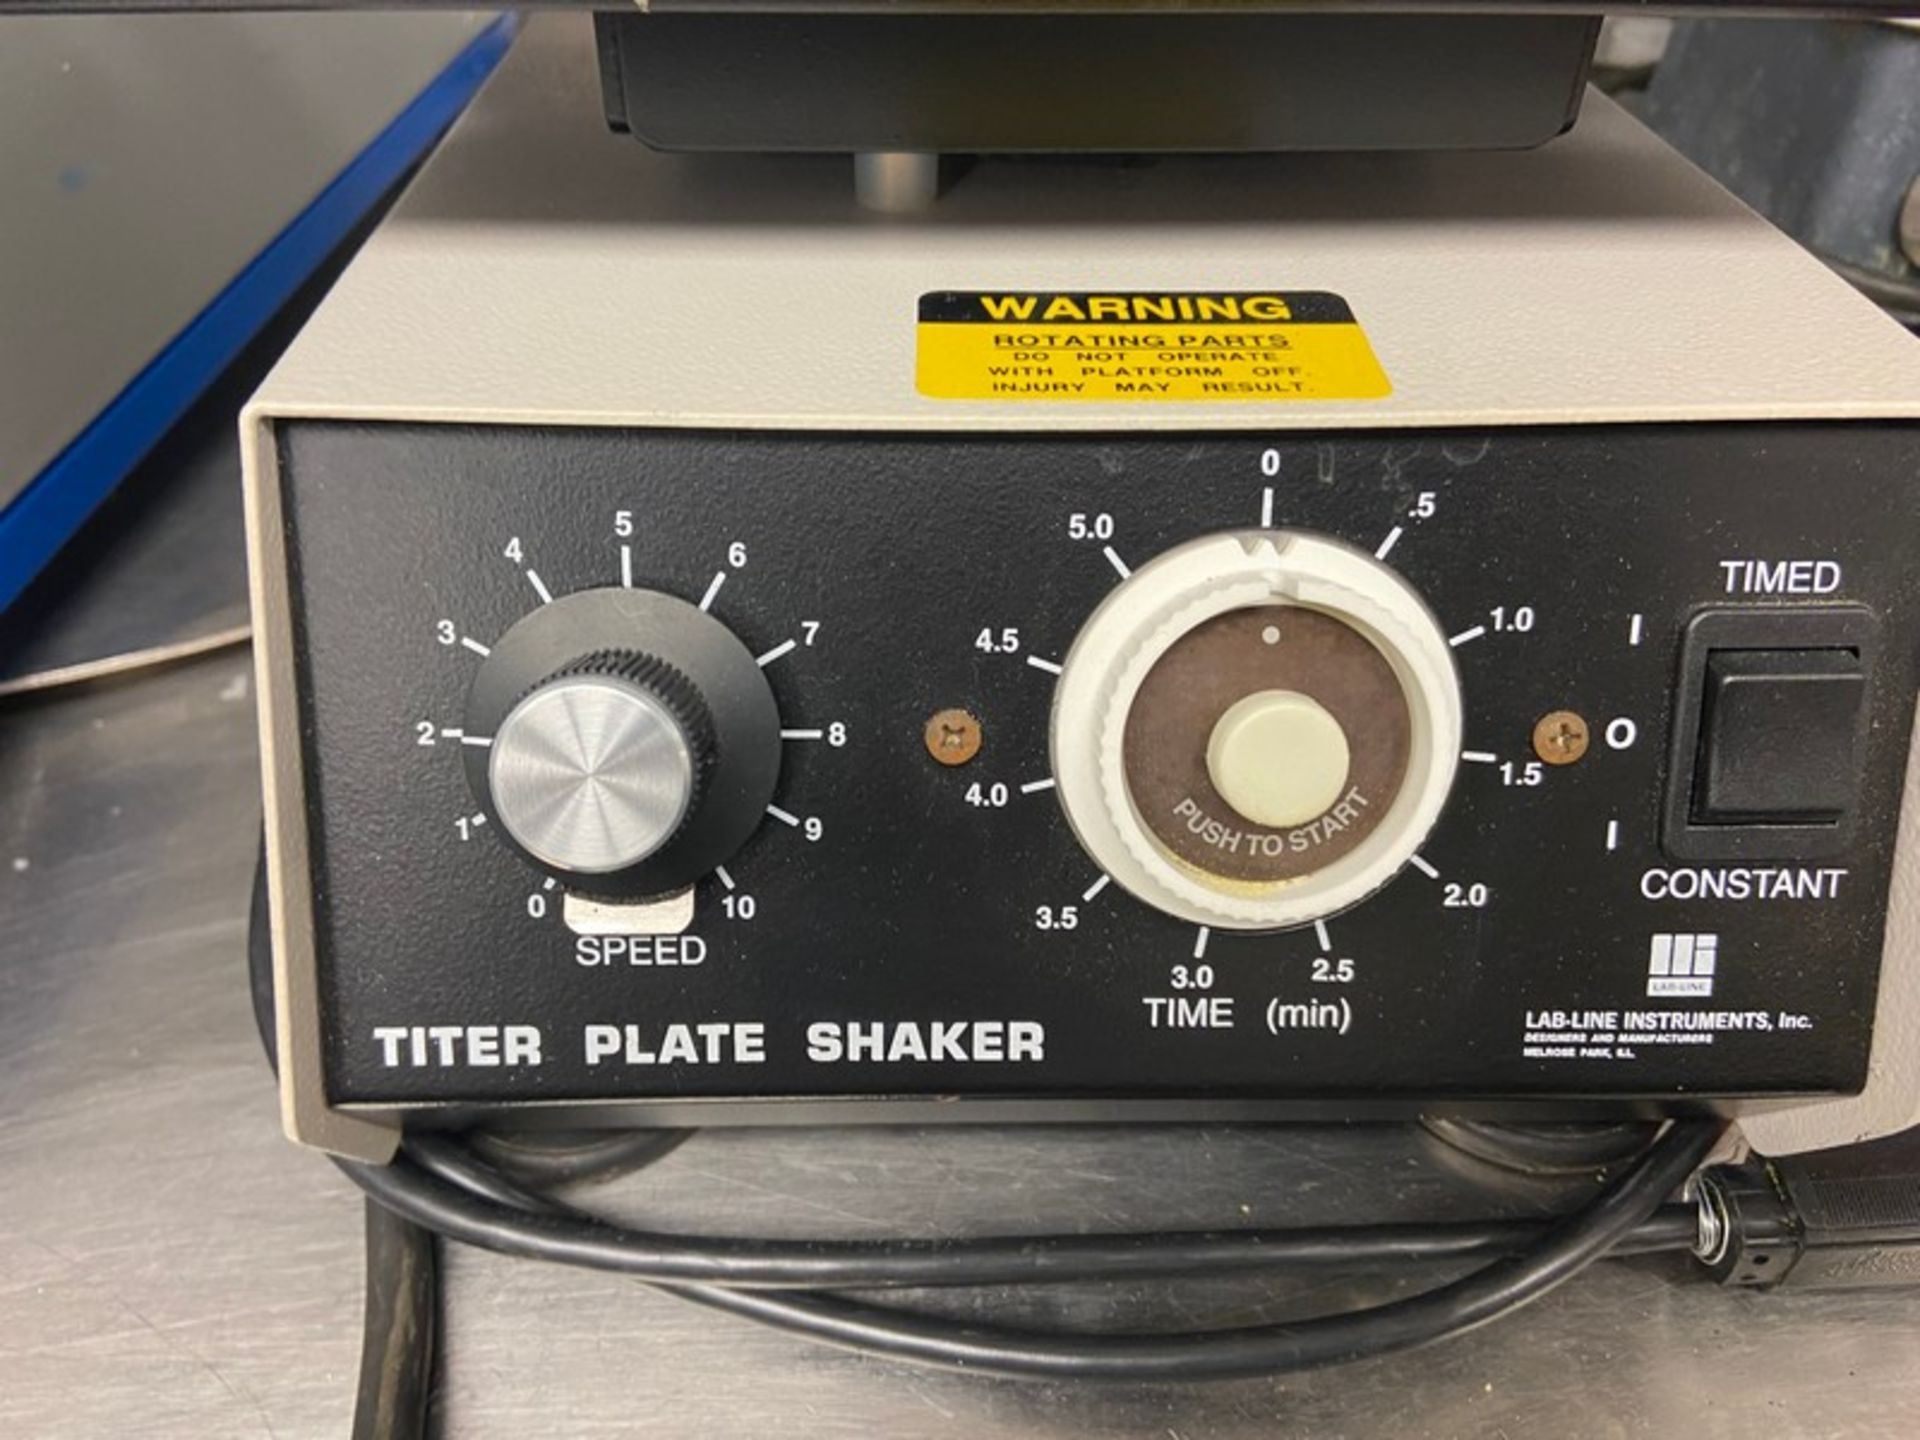 Lab Line Instruments Inc. Titer Plate Shaker, M/N 4625, S/N 0399-1066, 120 Volts (LOCATED IN-FOR - Image 3 of 4